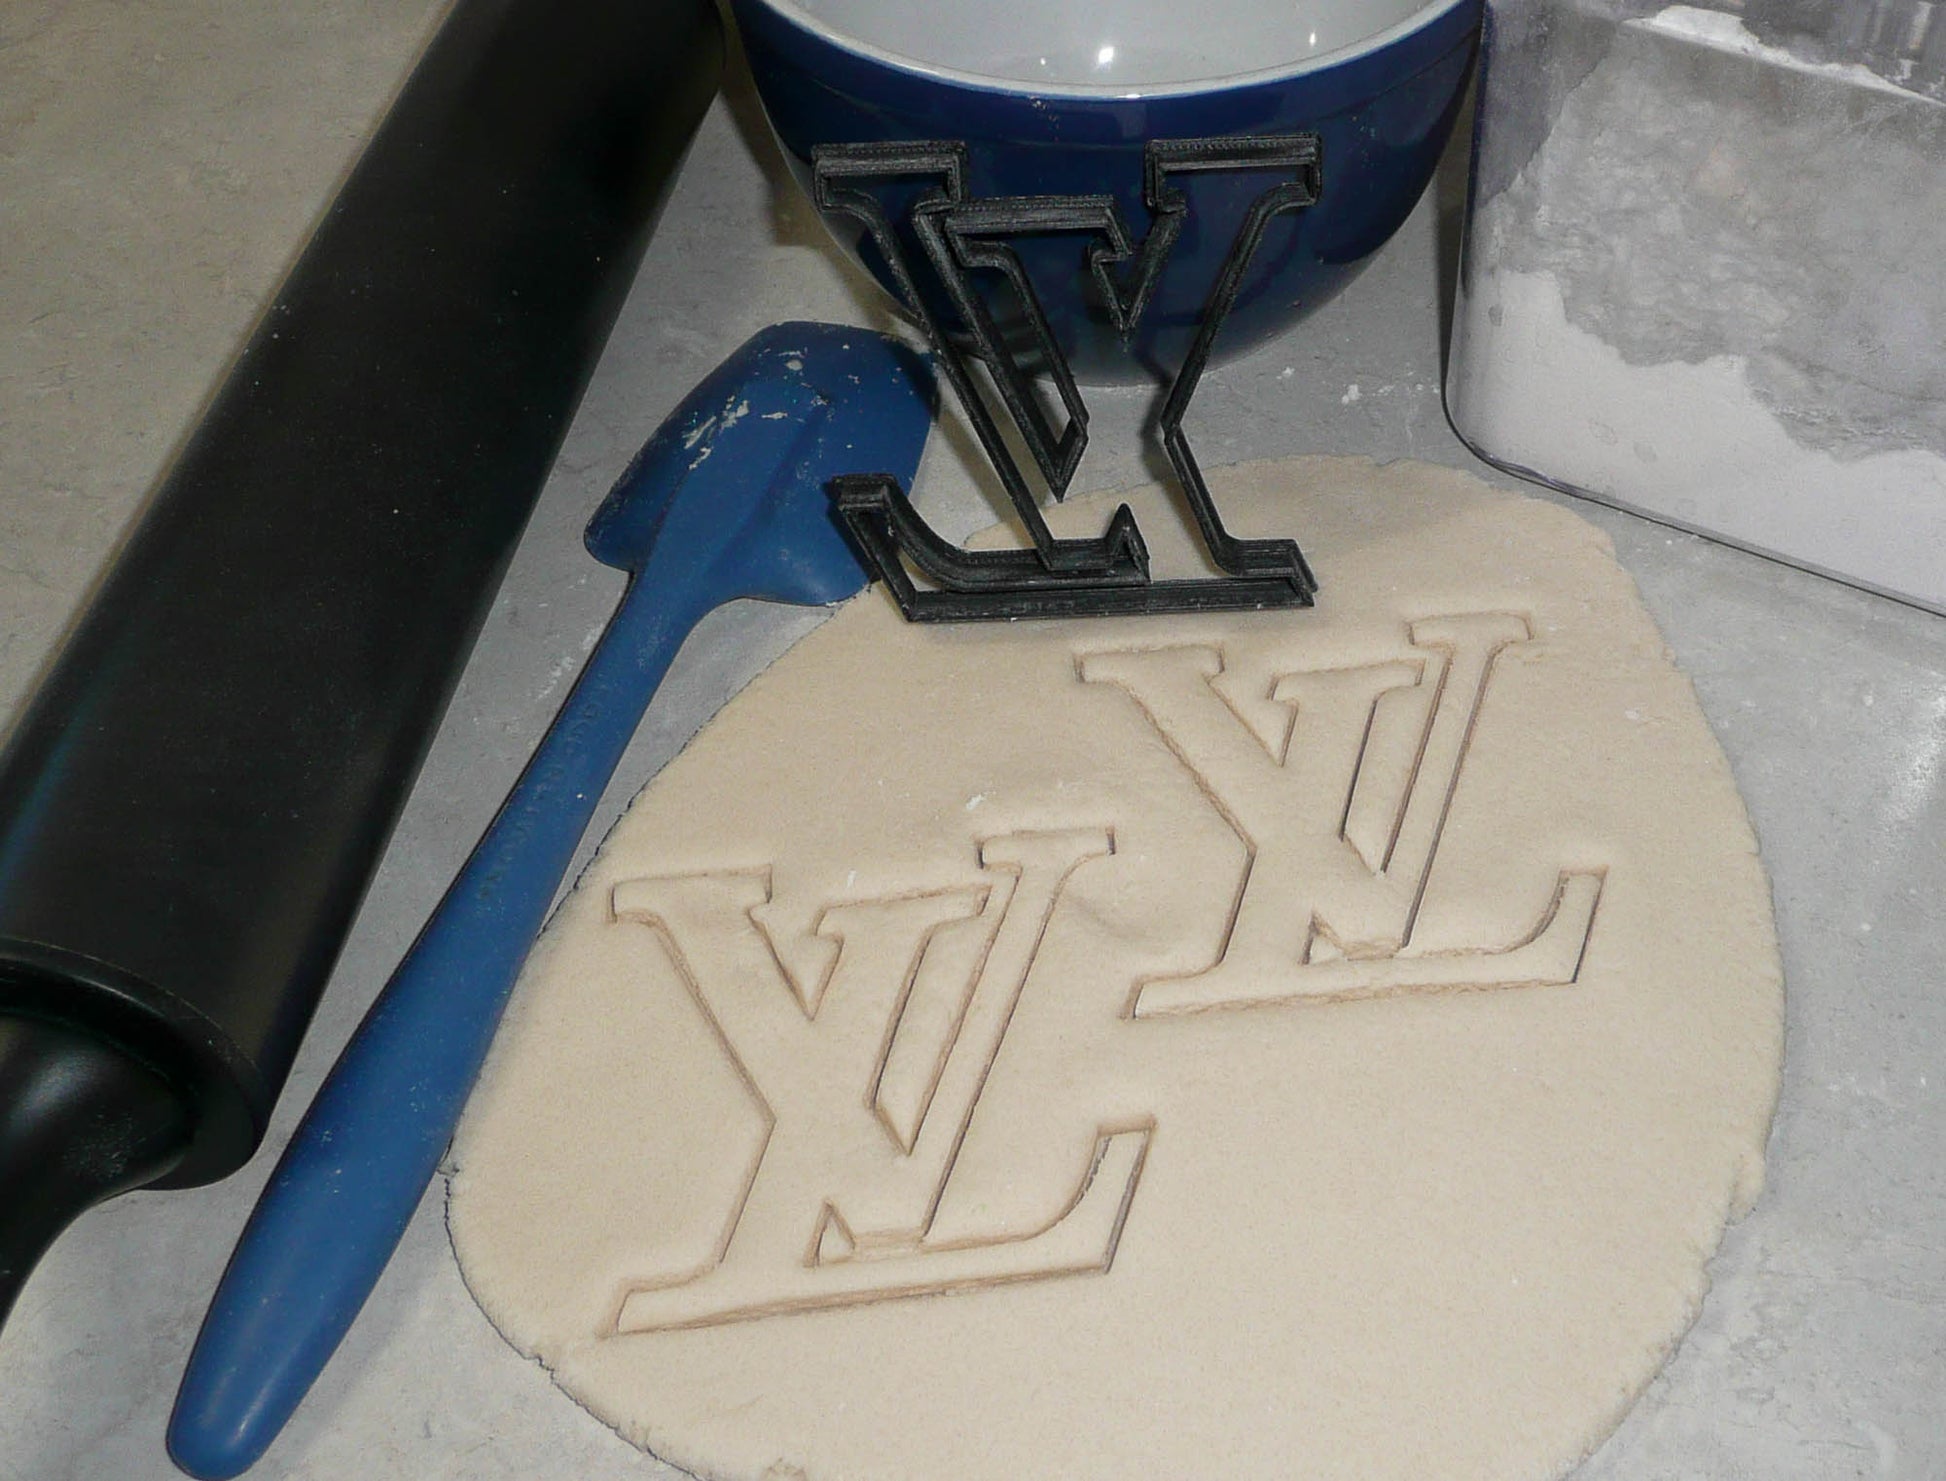 OUR CREATIONS LV Cookie Cutter Stamp Luxury Brand